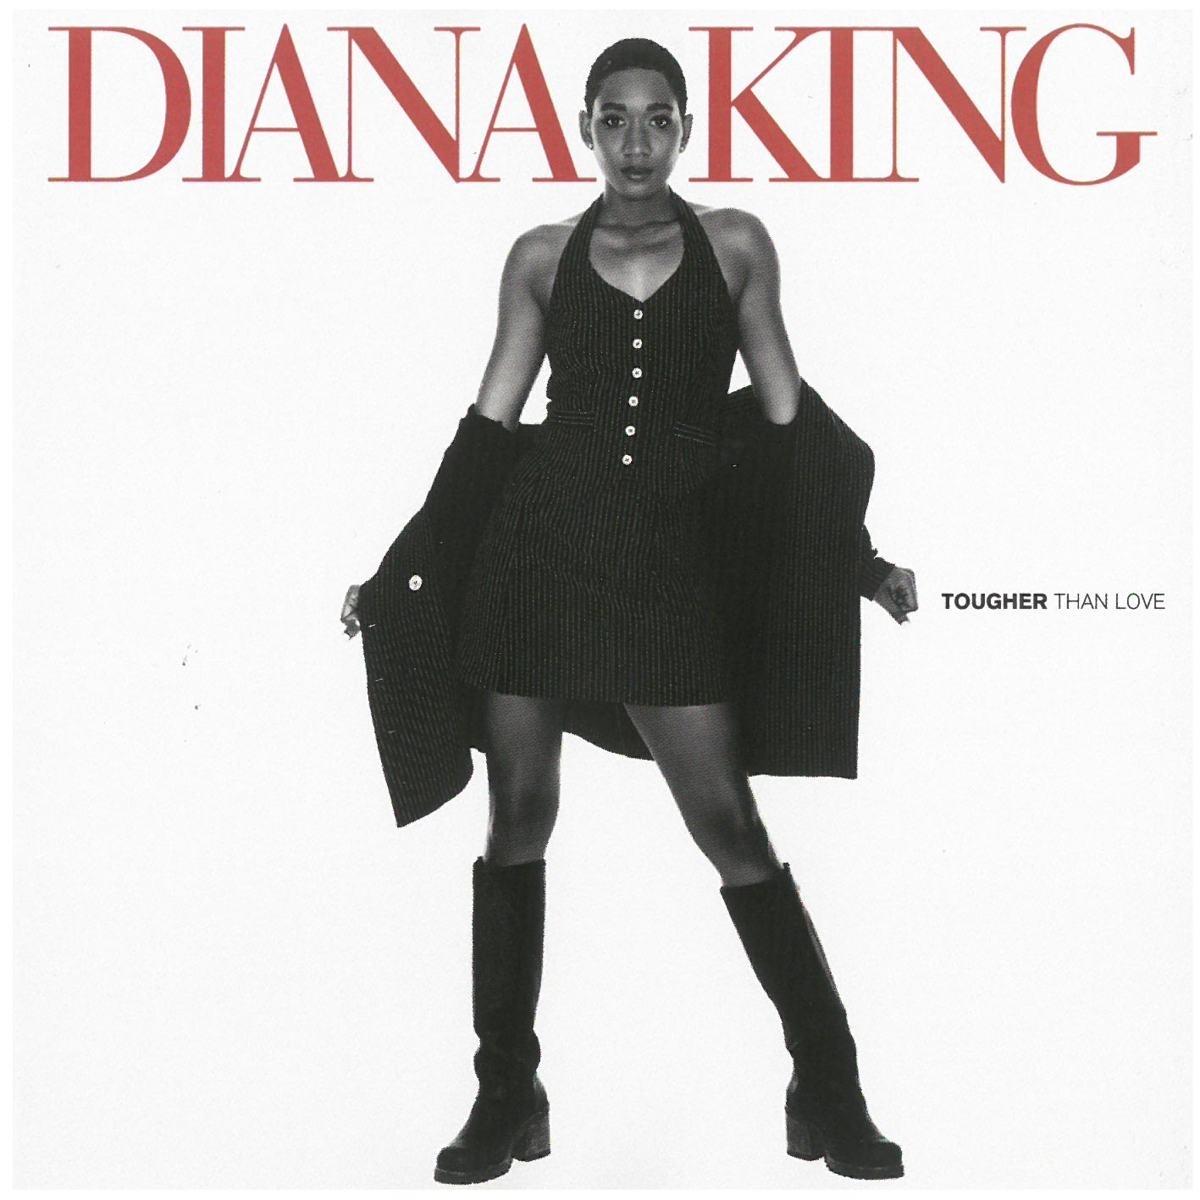  Diana * King (DIANA KING) / TOUGHER THAN LOVE disk . scratch equipped CD